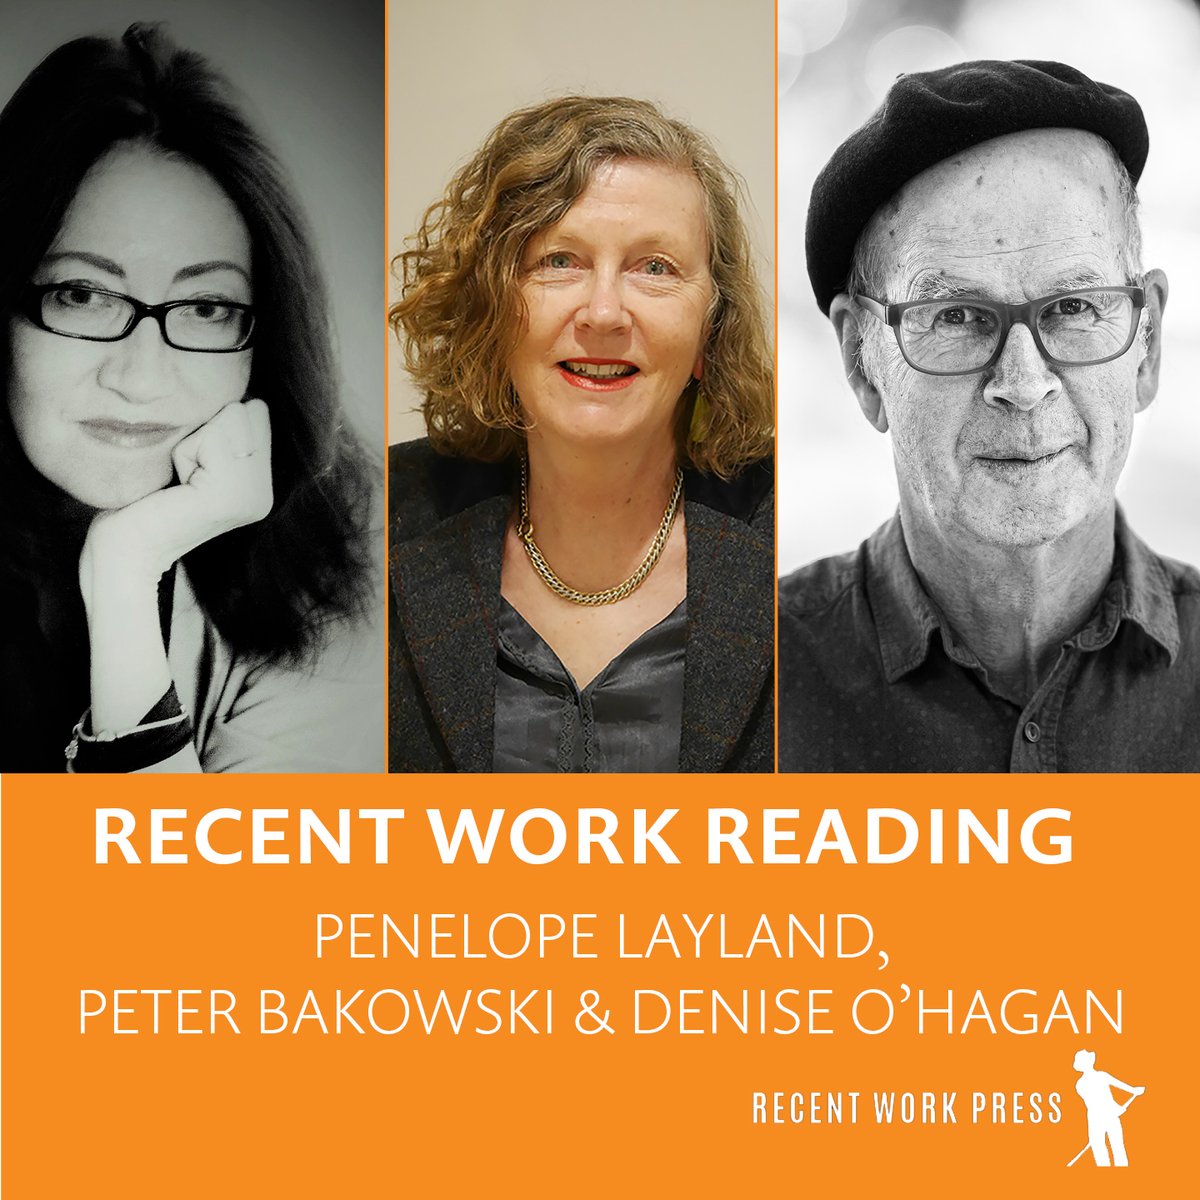 Mon 17 Oct, 7pm: Recent Work Readings: Penelope Layland, Peter Bakowski & Denise O'Hagan. Join us live at Smiths Alternatives for the launch of three new titles from Recent Work Press. https://t.co/vtyb4PNKf3 https://t.co/42j9fxxsXk